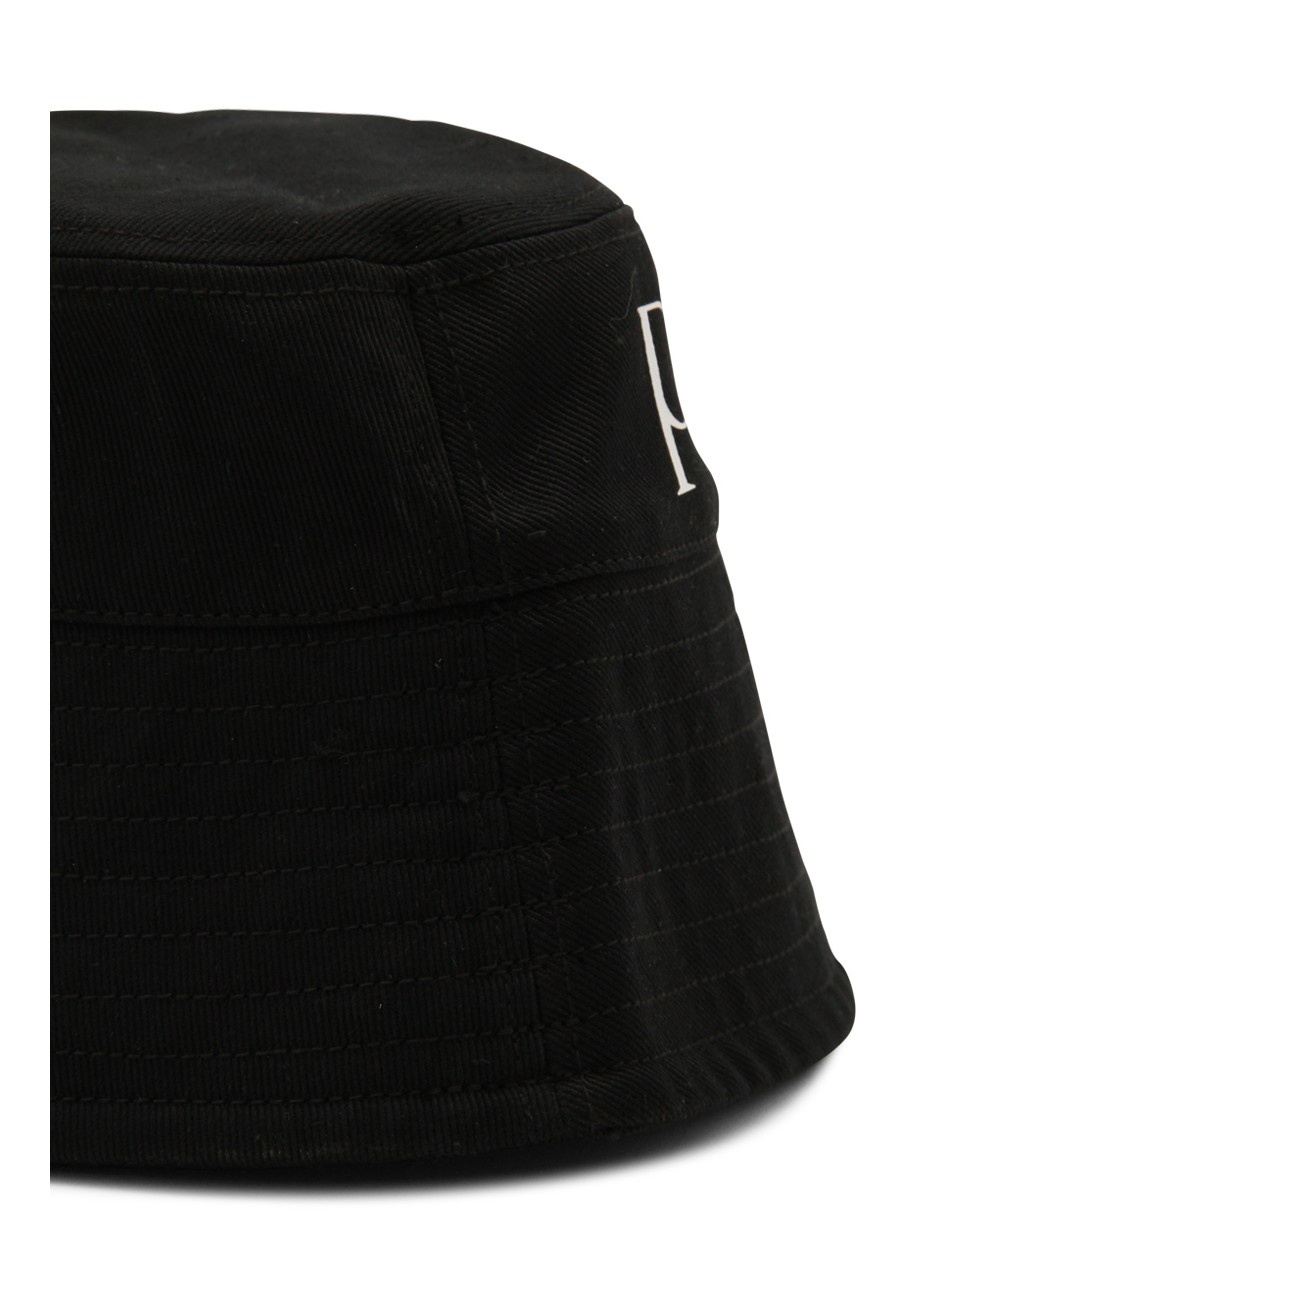 black and white cotton bucket hat - 2